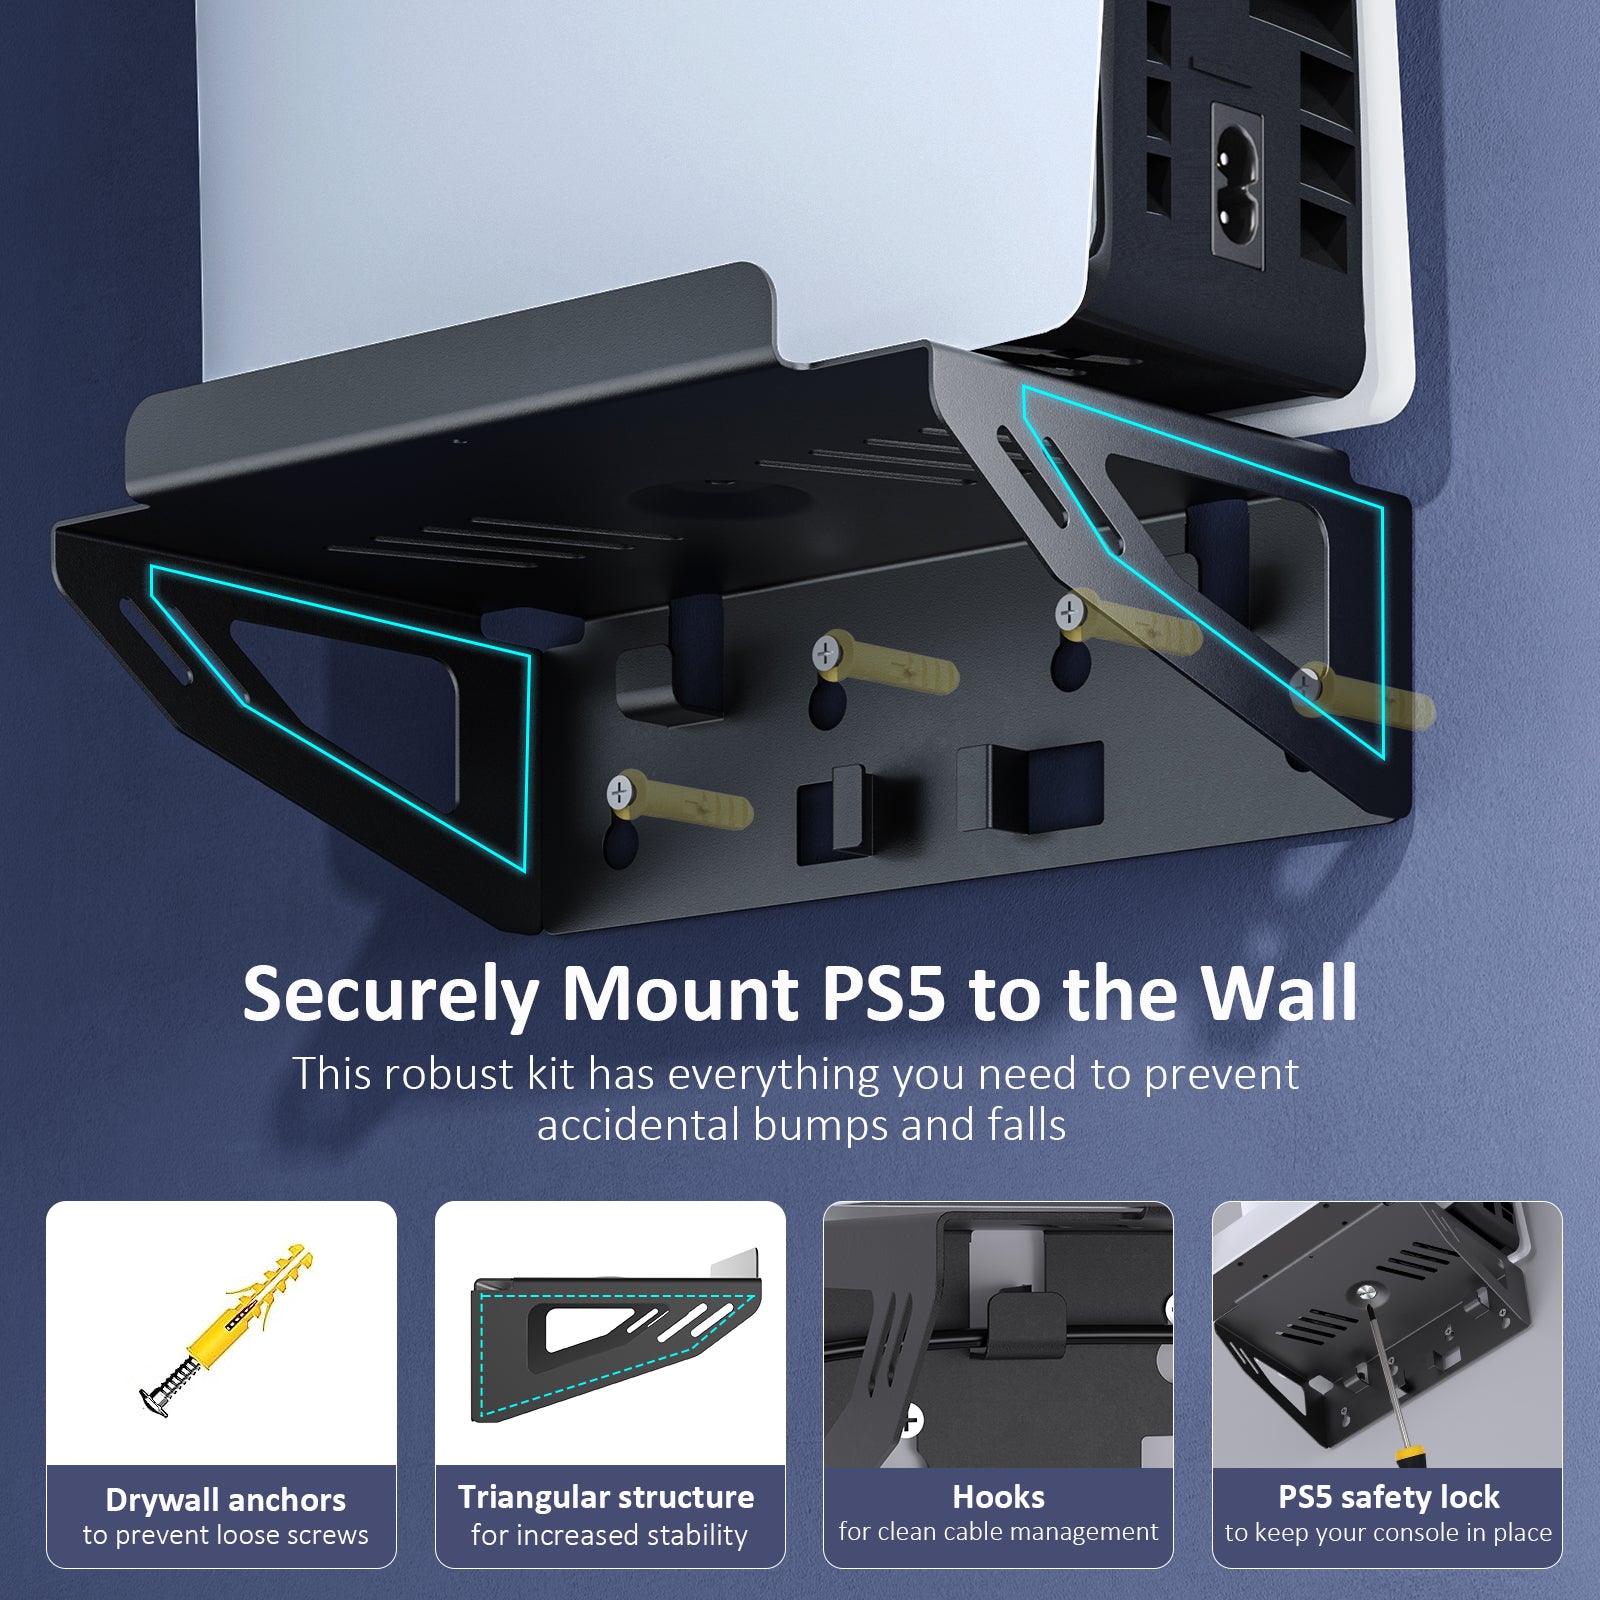 Secure your PS5 Slim console to the wall with this bracket.